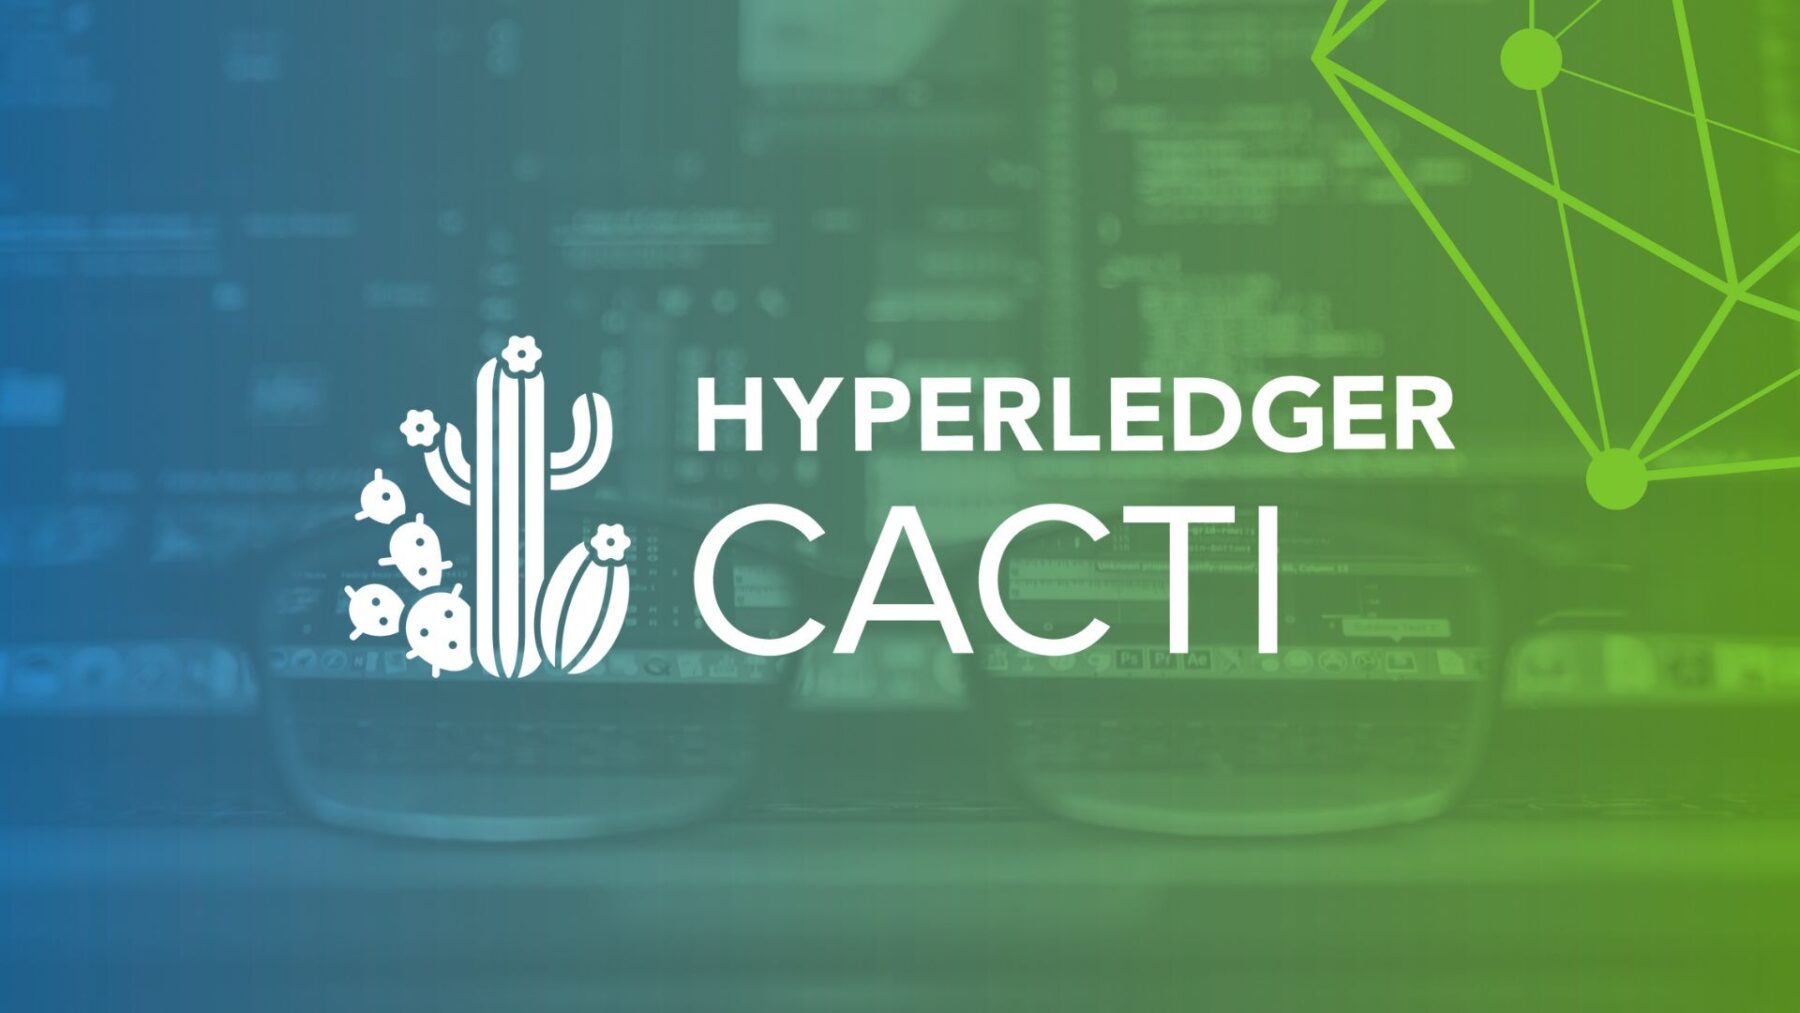 Introducing Hyperledger Cacti, a multi-faceted pluggable interoperability framework